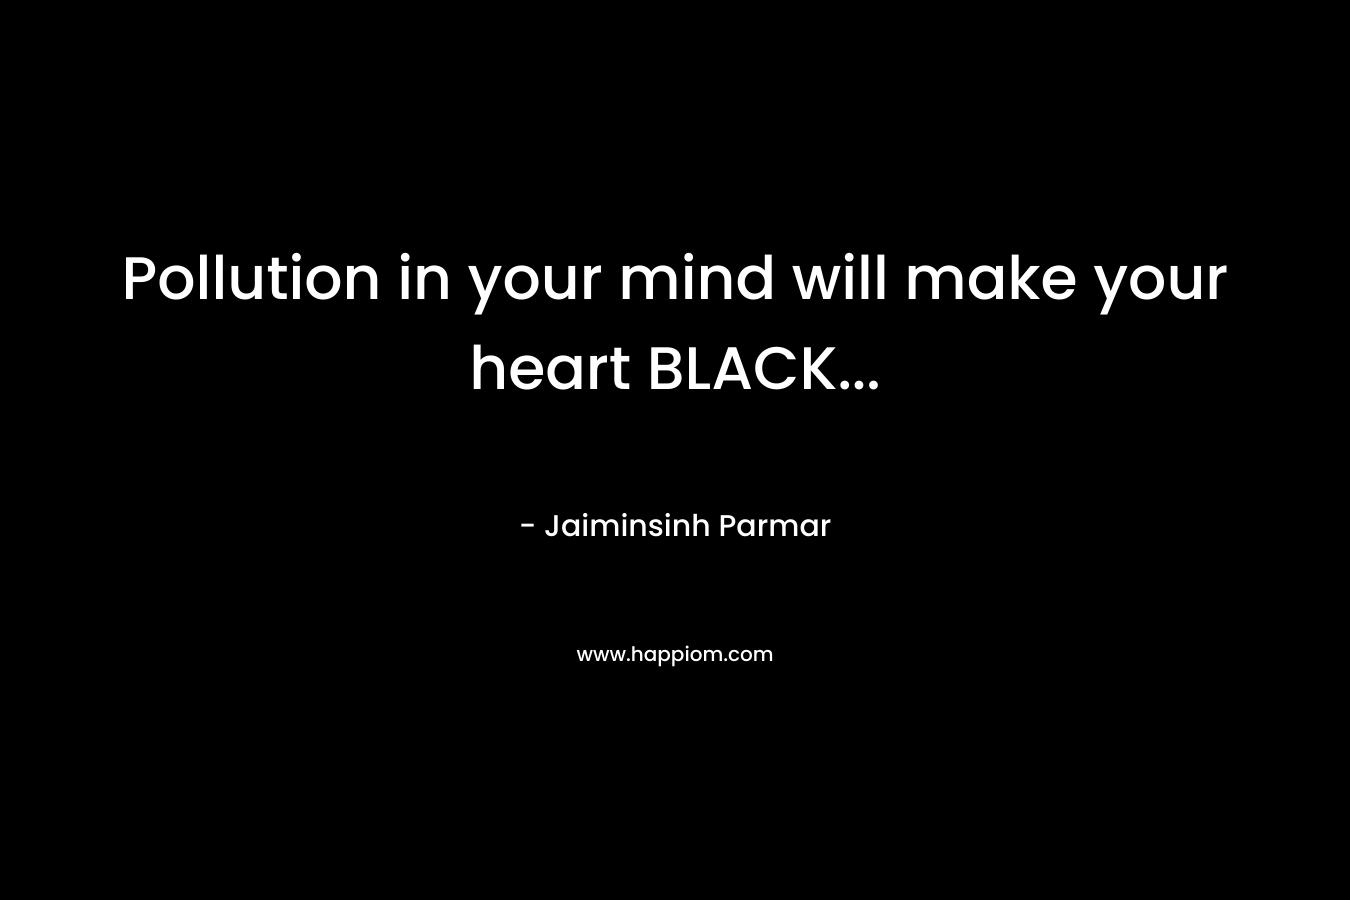 Pollution in your mind will make your heart BLACK… – Jaiminsinh Parmar